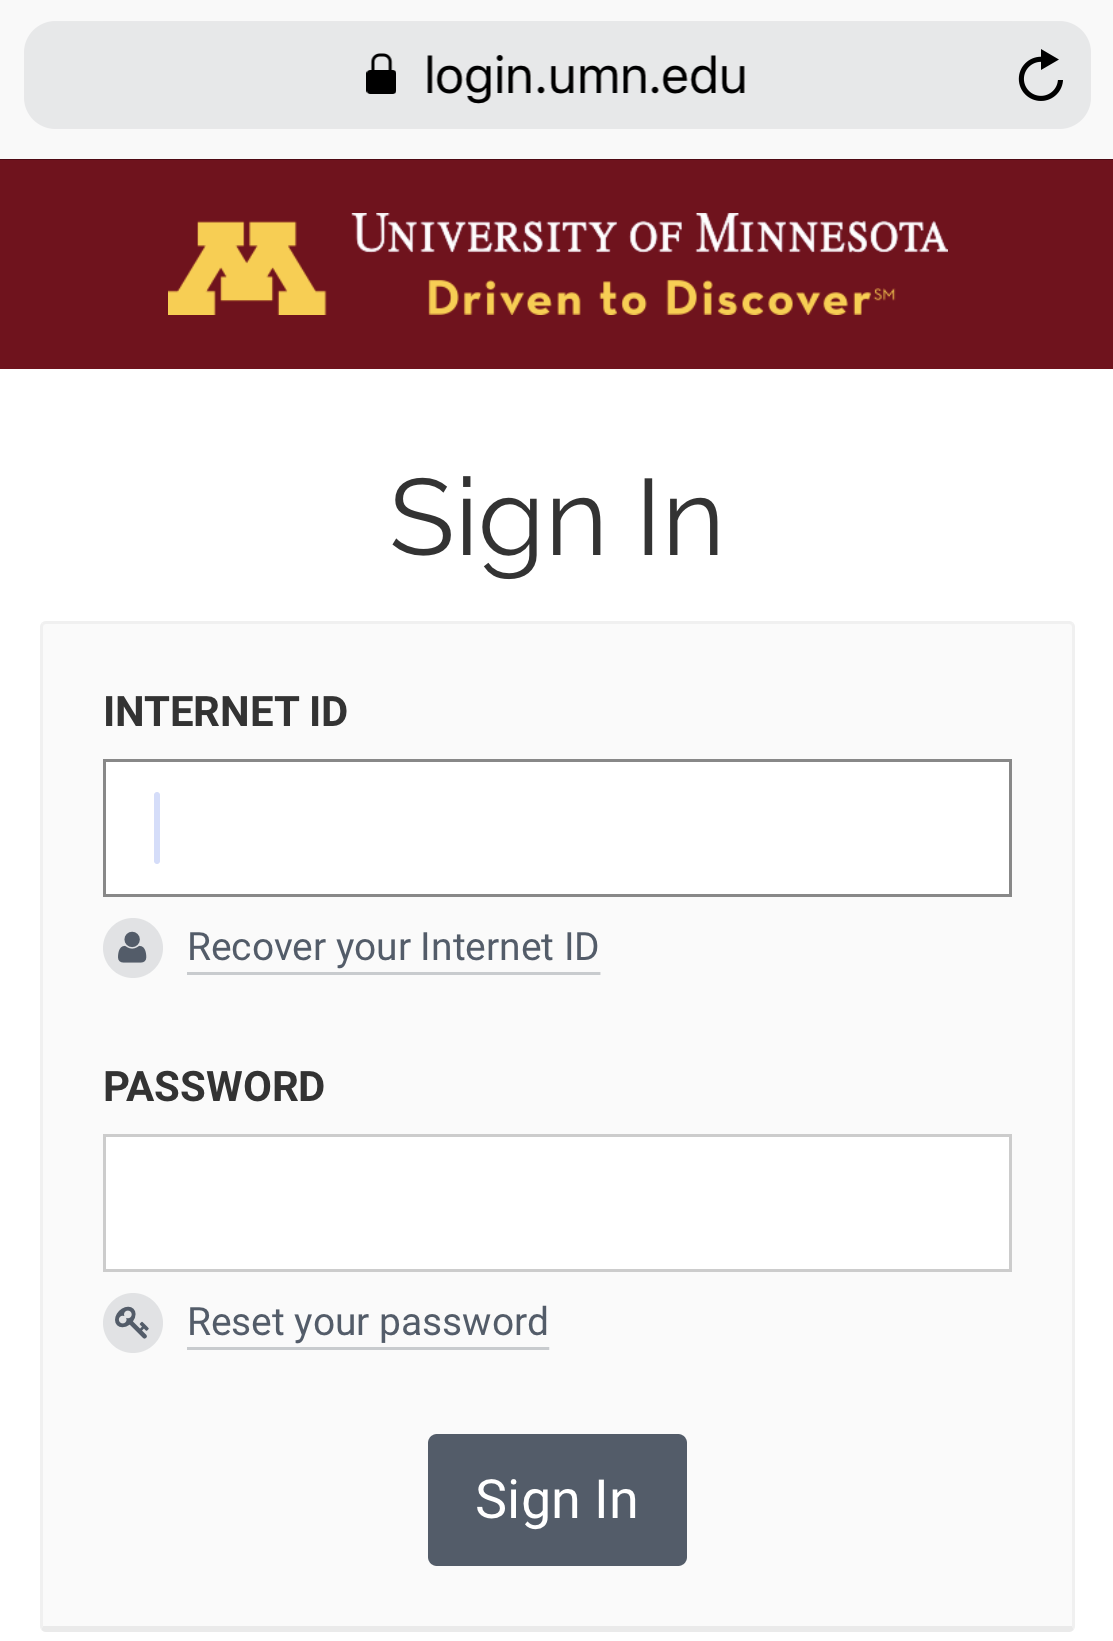 The UMN Single Sign On page in a mobile web browser showing the Internet ID and password fields along with the Sign In button